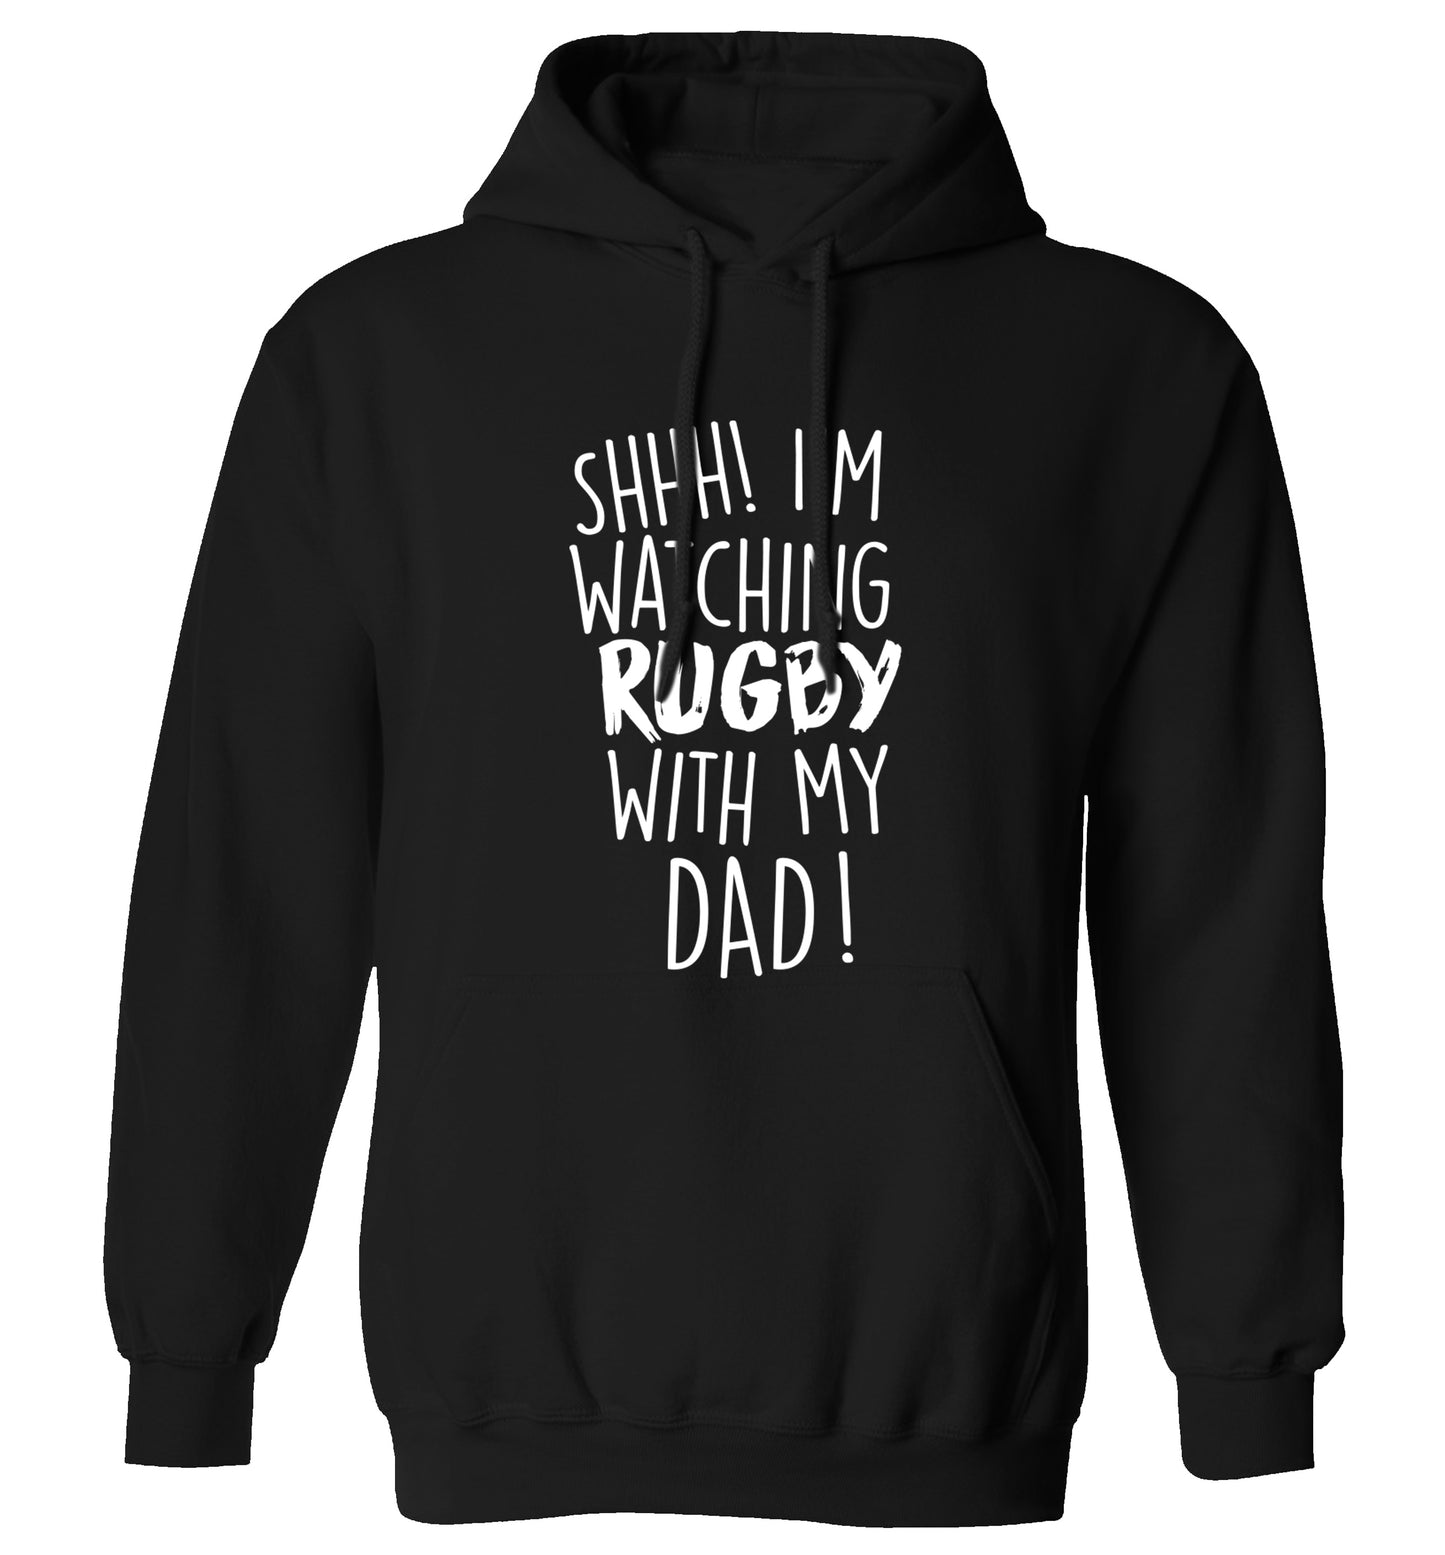 Shh... I'm watching rugby with my dad adults unisex black hoodie 2XL